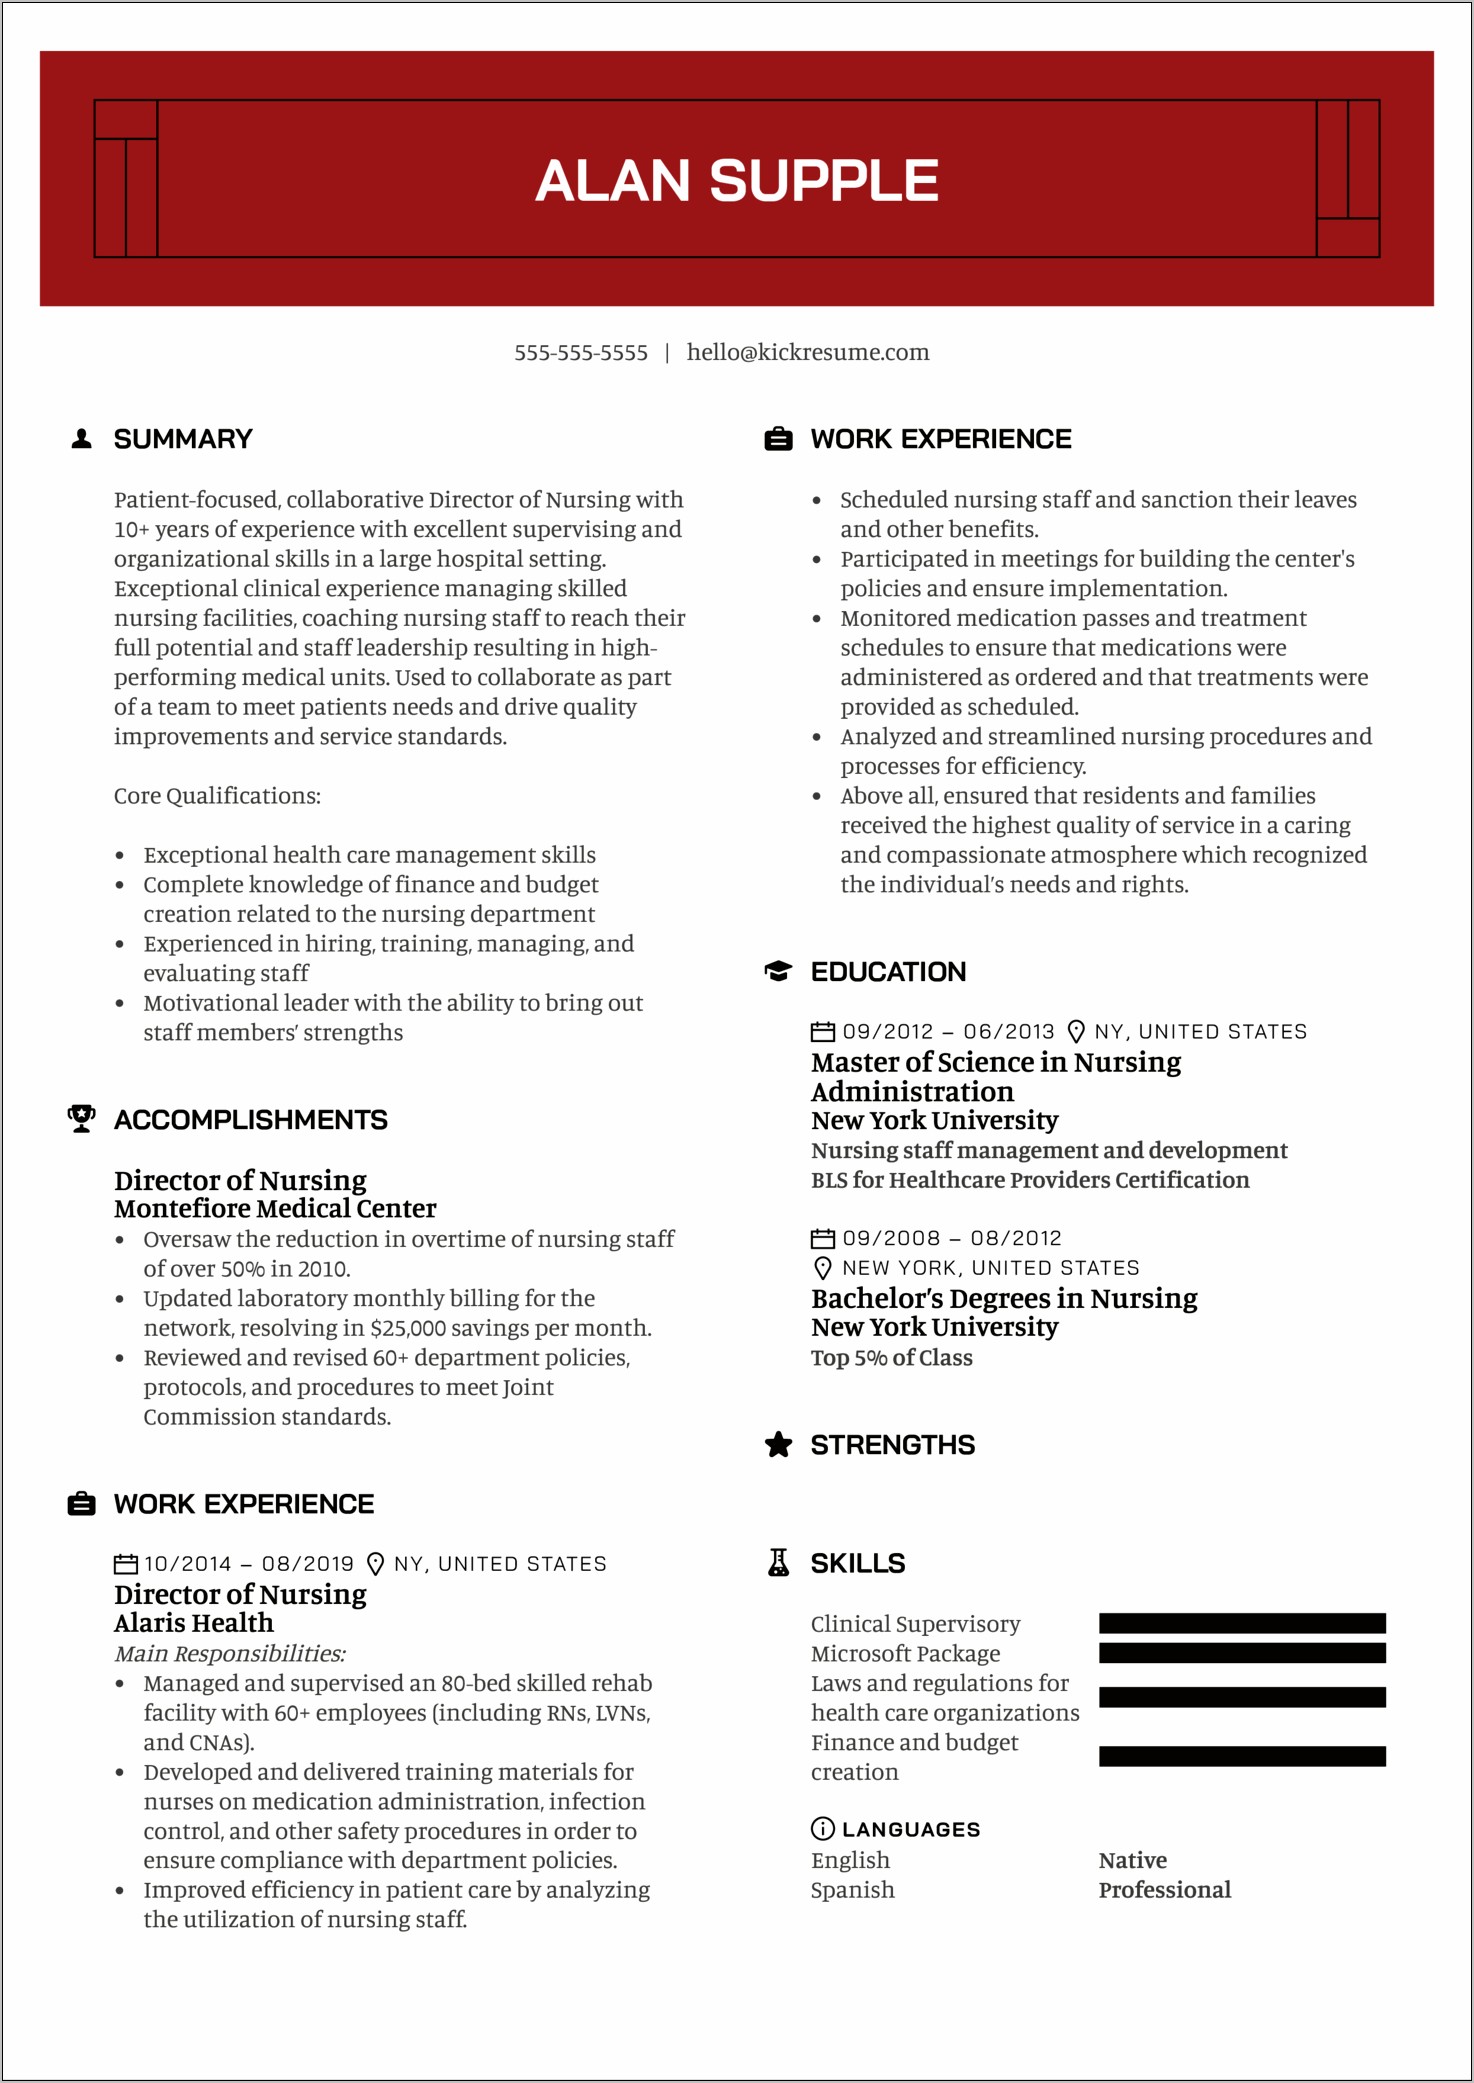 Best Resume Additional Skills For Mental Health Services